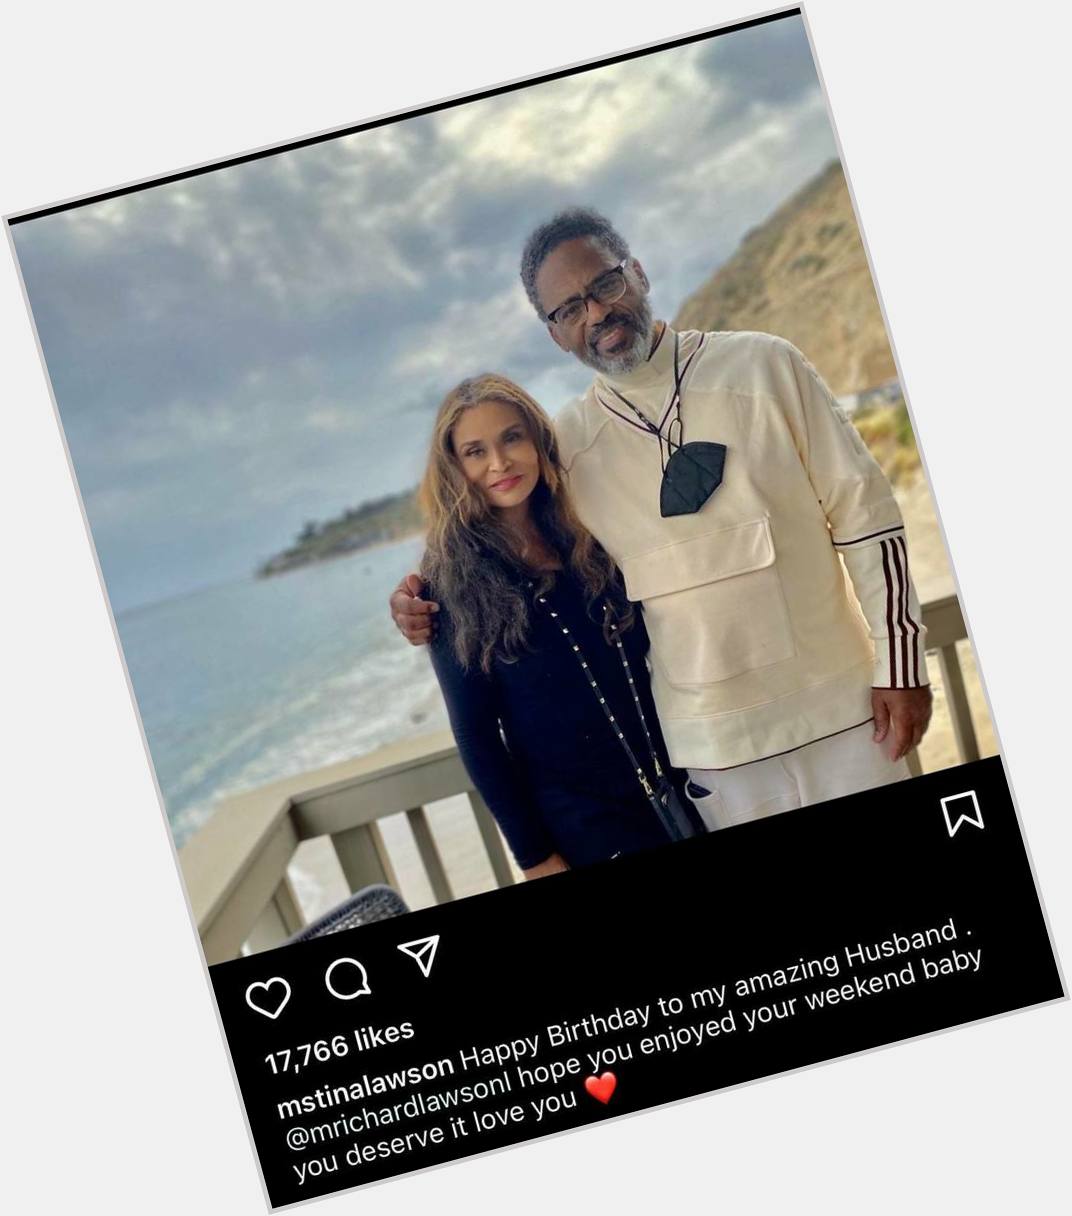 Tina Lawson posts a Happy Birthday message to her husband Richard Lawson. Loves it! 